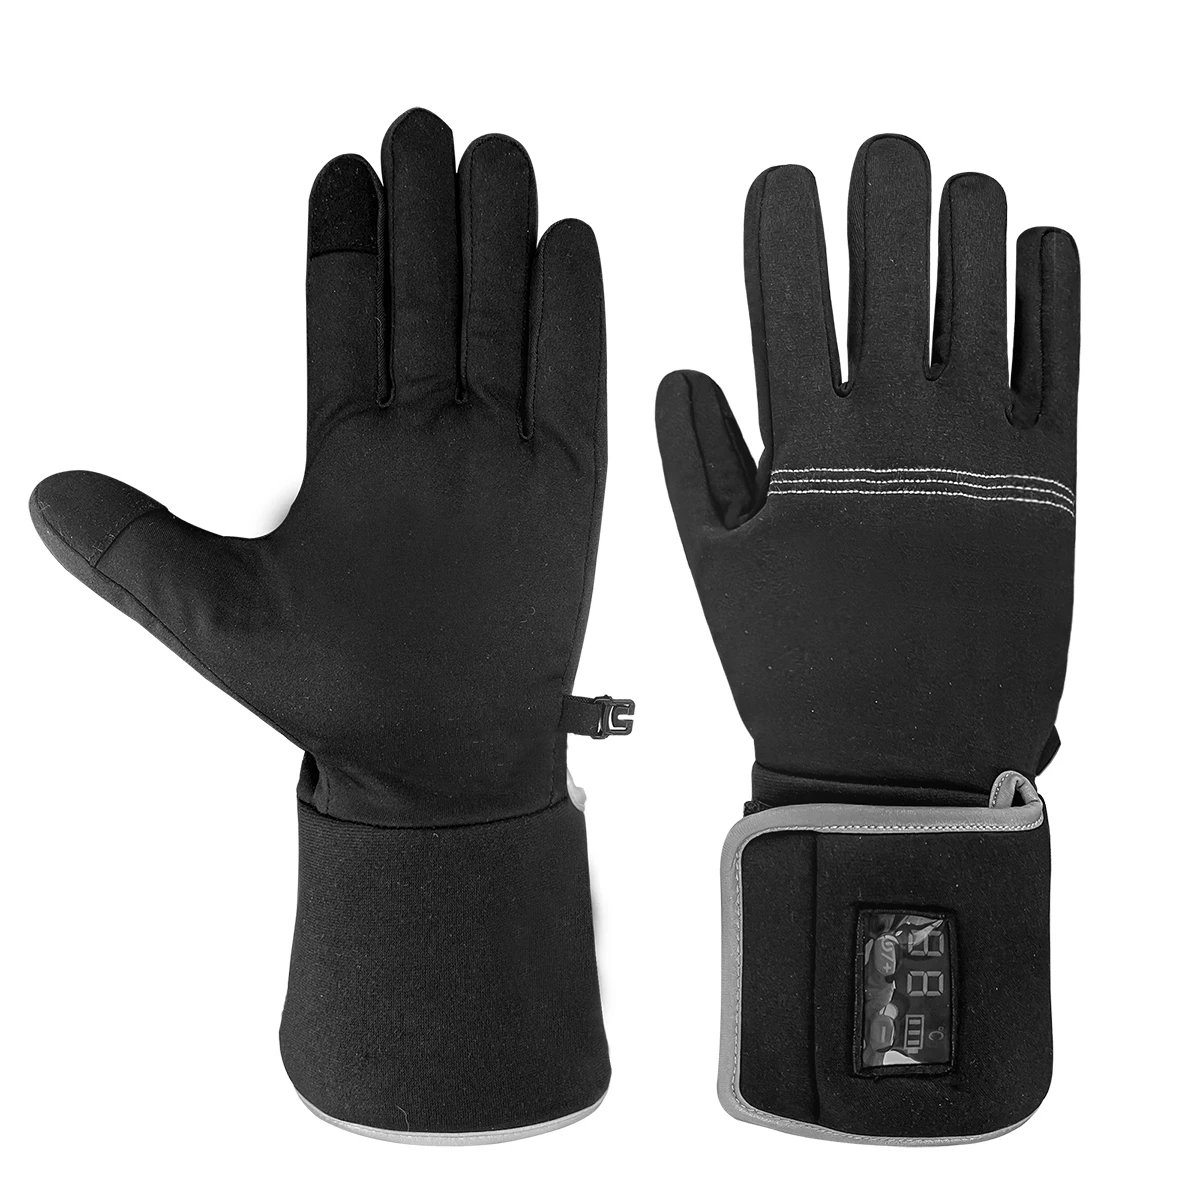 Thermal Gloves Heated Gloves Winter Warmer Mitten Liners Motorcycle Ski Snow Glove Rechargeable Battery Nylon for Men And Women Arthritis Hands Black 